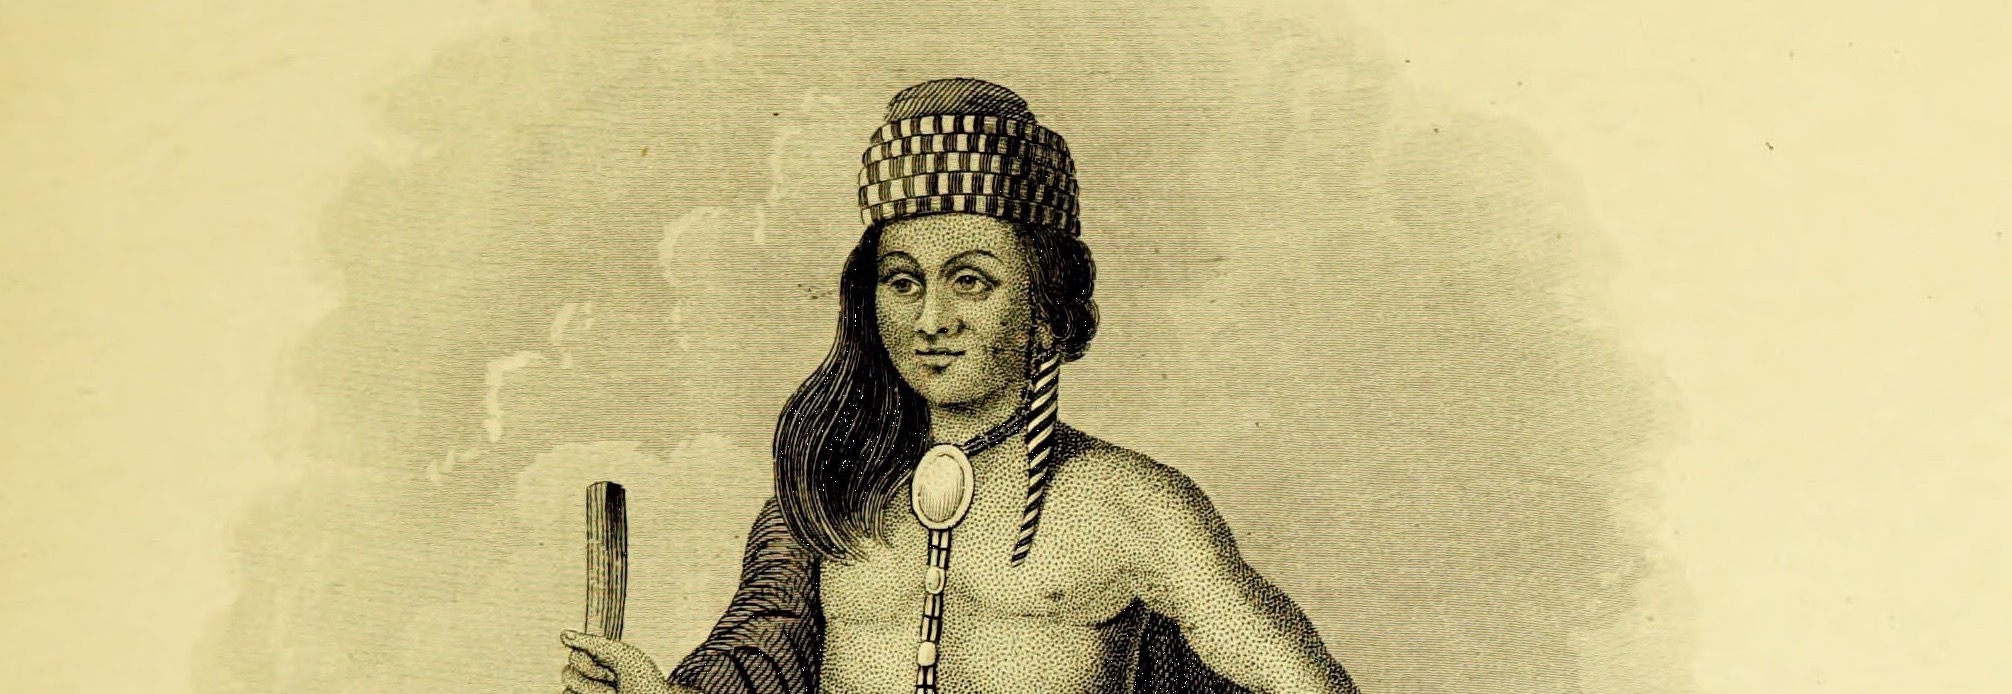 Memory: Indigenous Subjects of Engravings